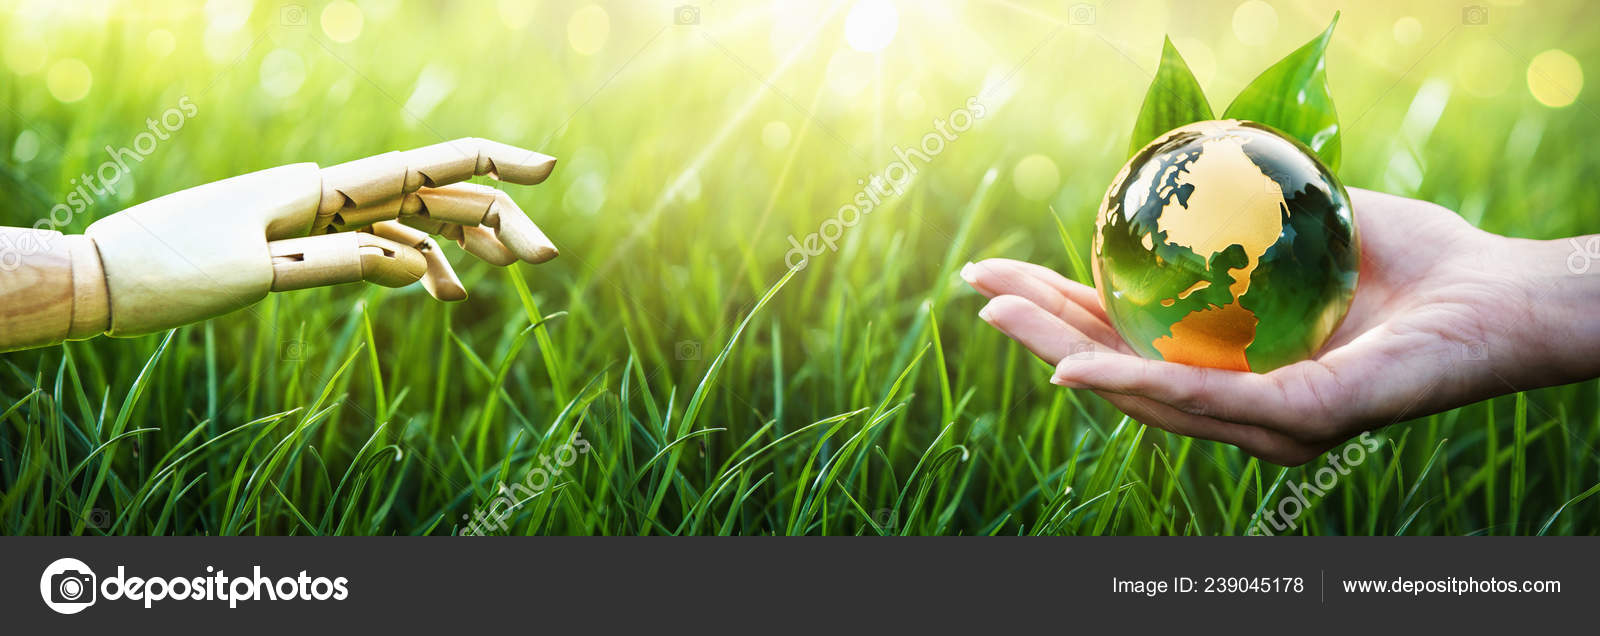 Save Earth. Green Planet in Your Hands. Environment Concept Stock ...